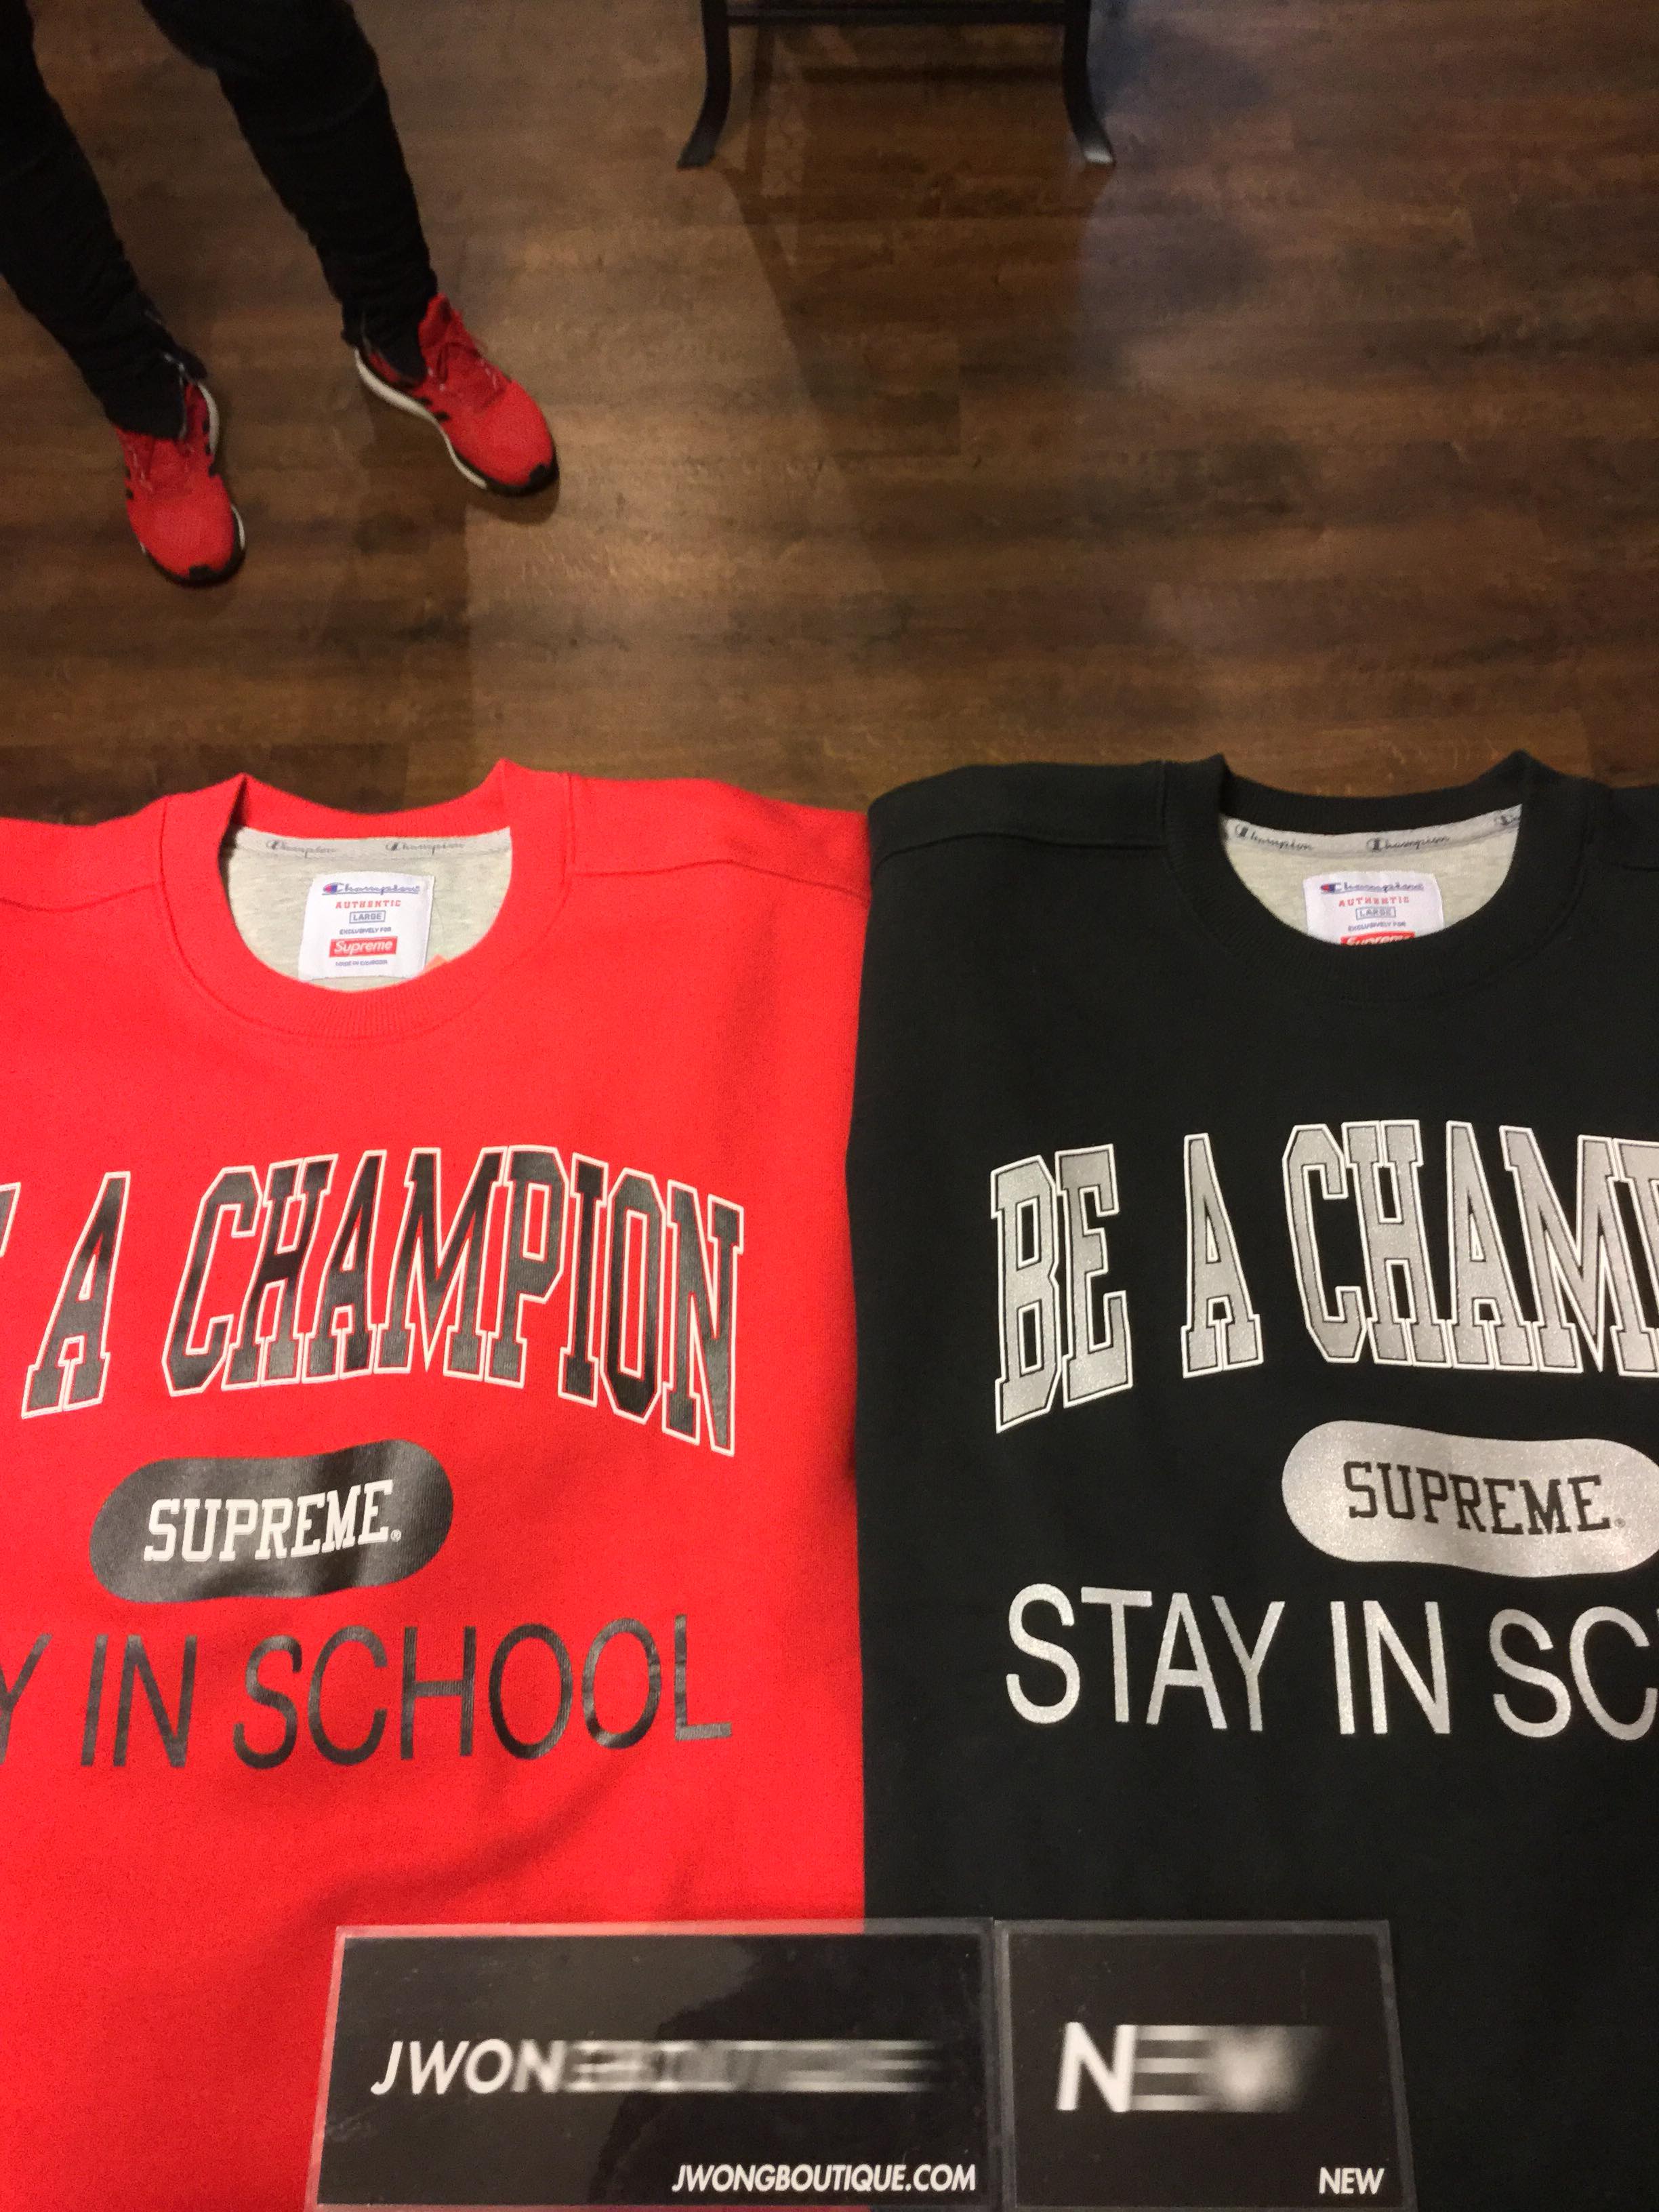 be a champion supreme stay in school